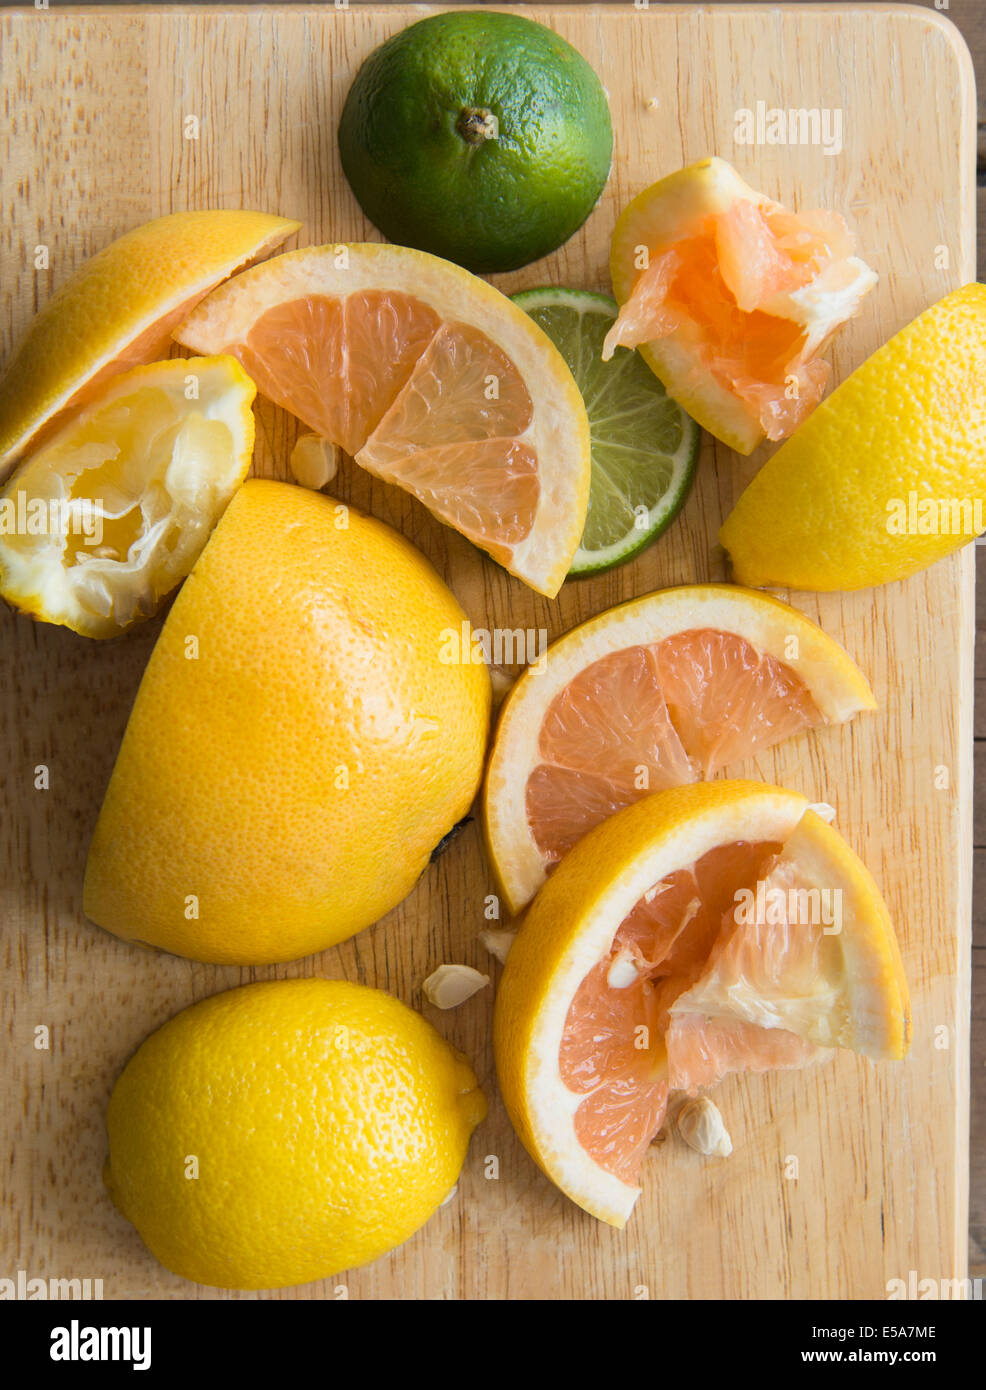 Sliced and squeezed fruit on wooden board Stock Photo